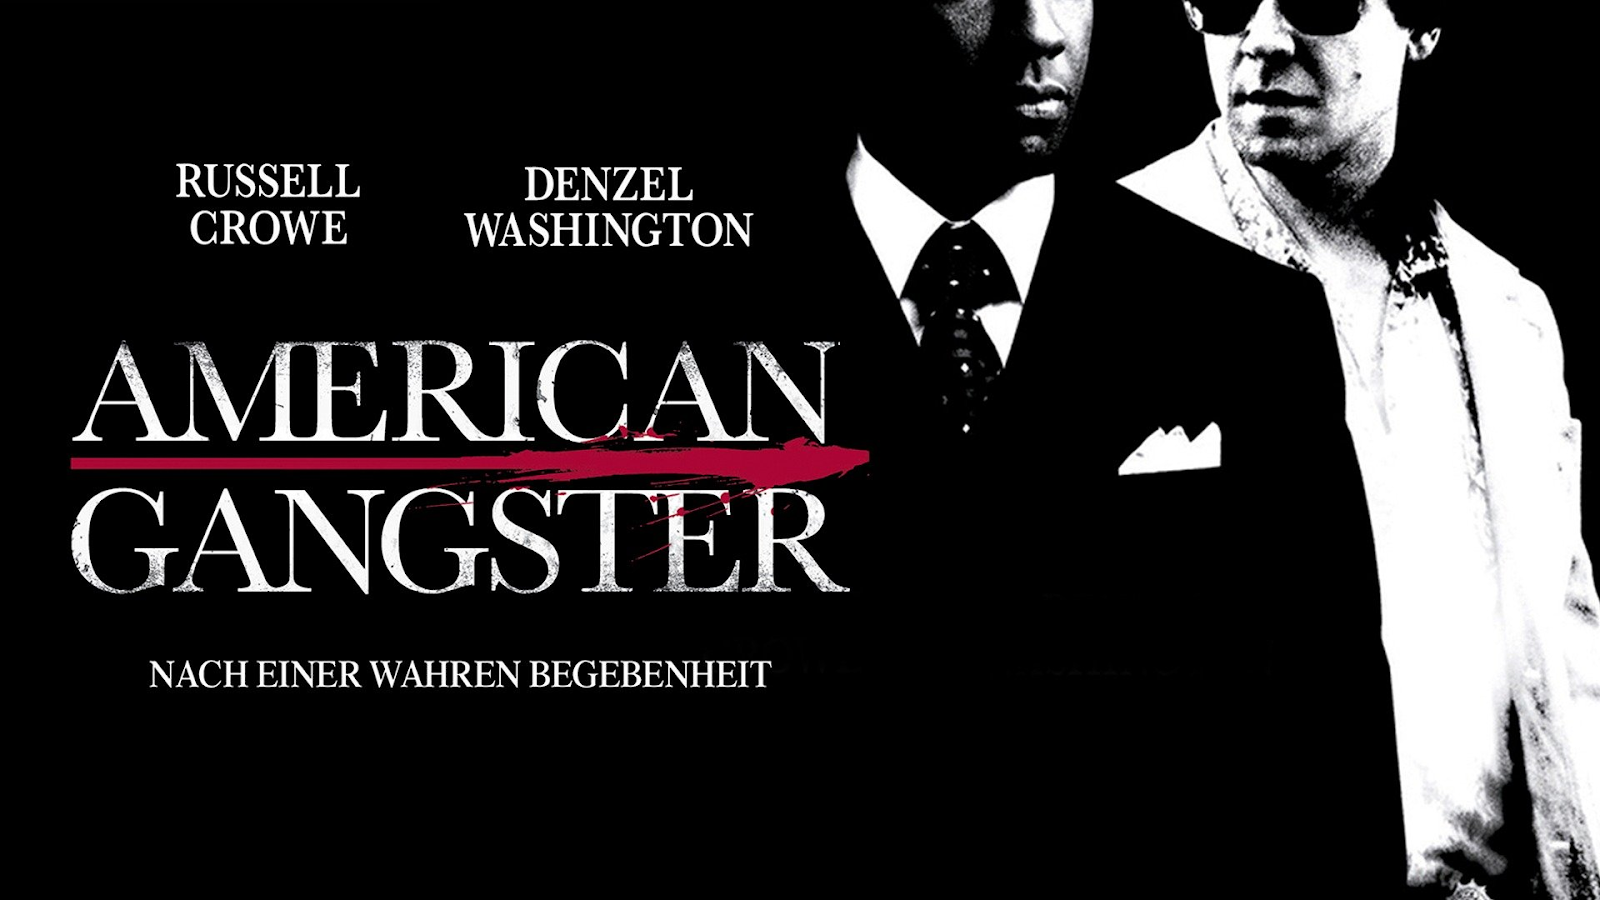 American Gangster (Photo: Rotten Tomatoes)